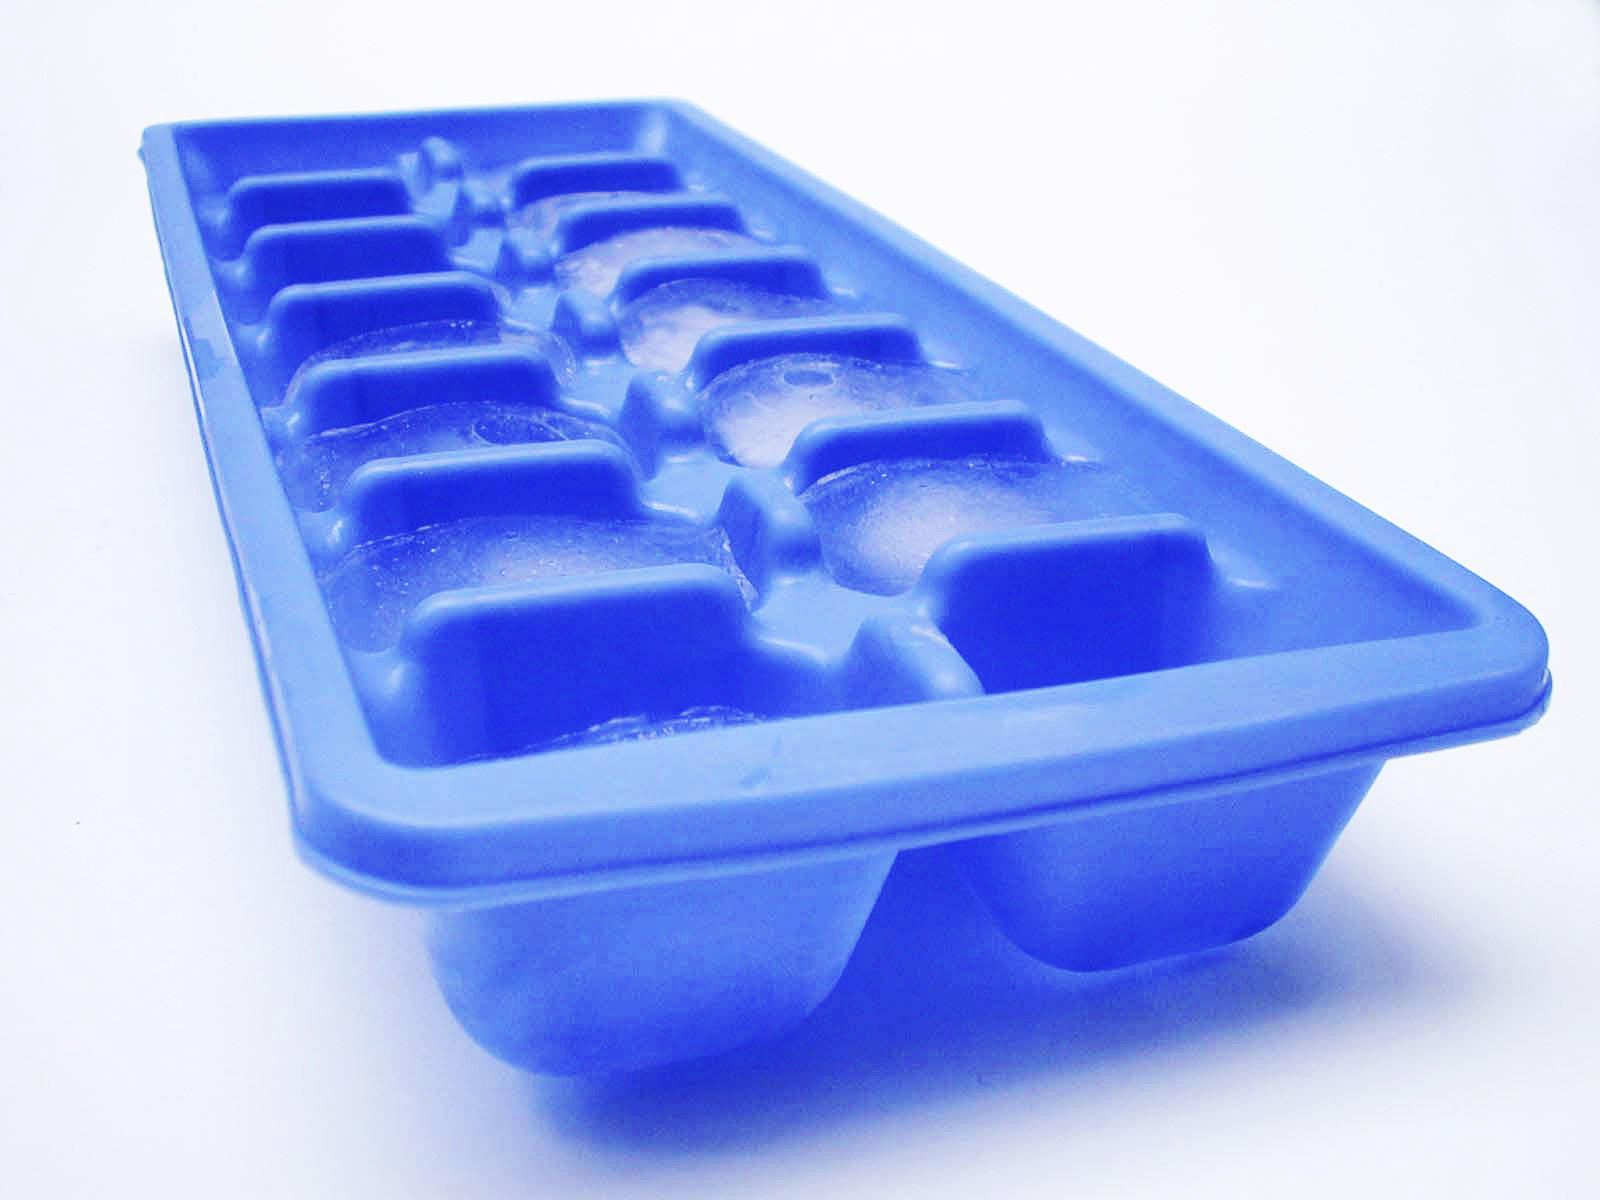 Harvest Right Medium Silicone Food Molds Set of 4